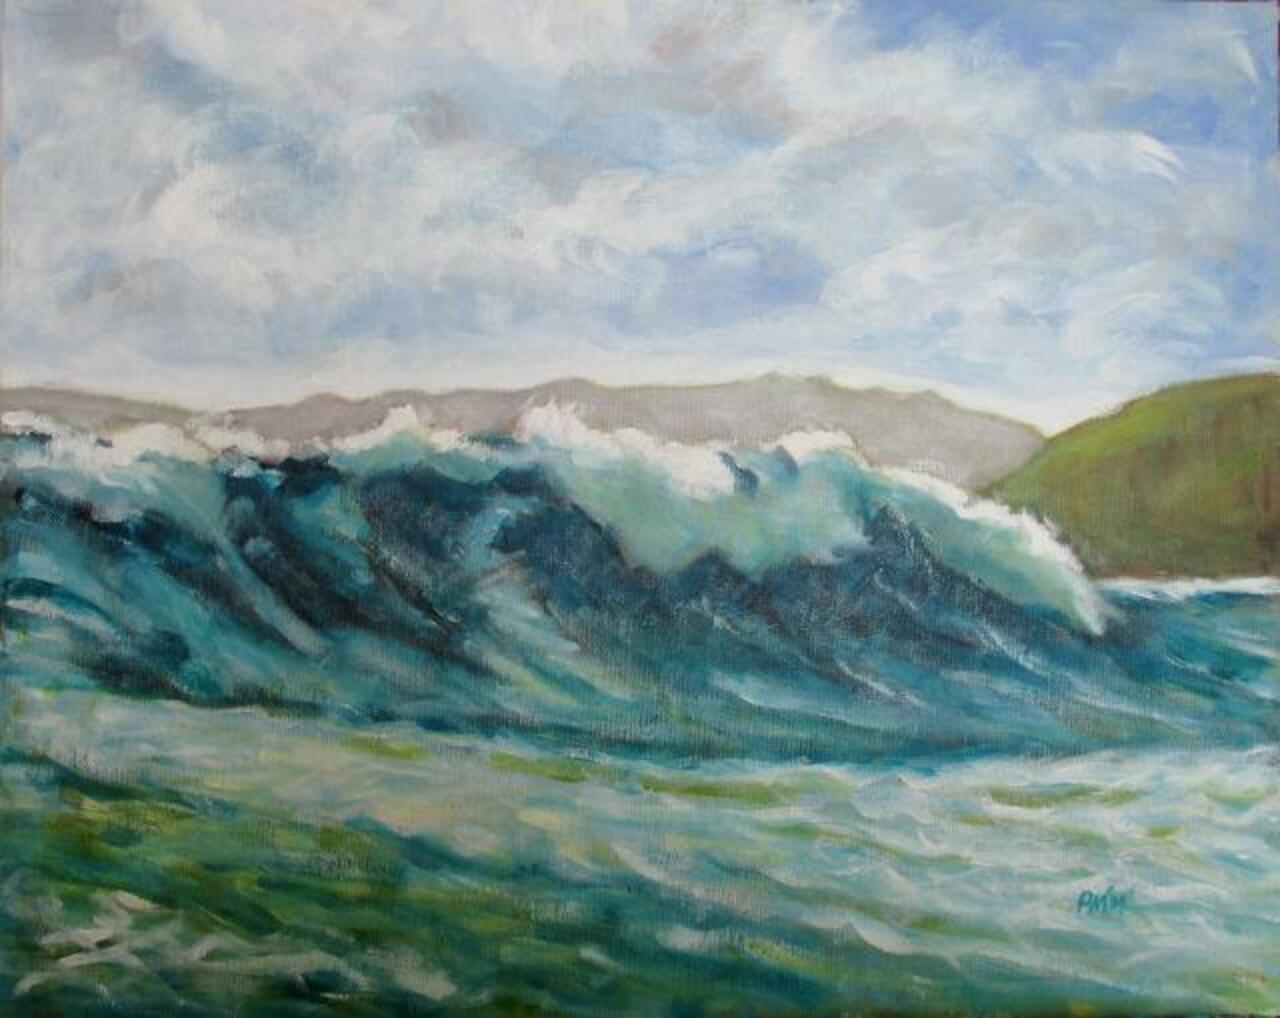 #TwitterFirstFriday Turquoise Wave 20 x 16" acrylic on board 2015 #art #painting #sea http://t.co/oESeLFIOek